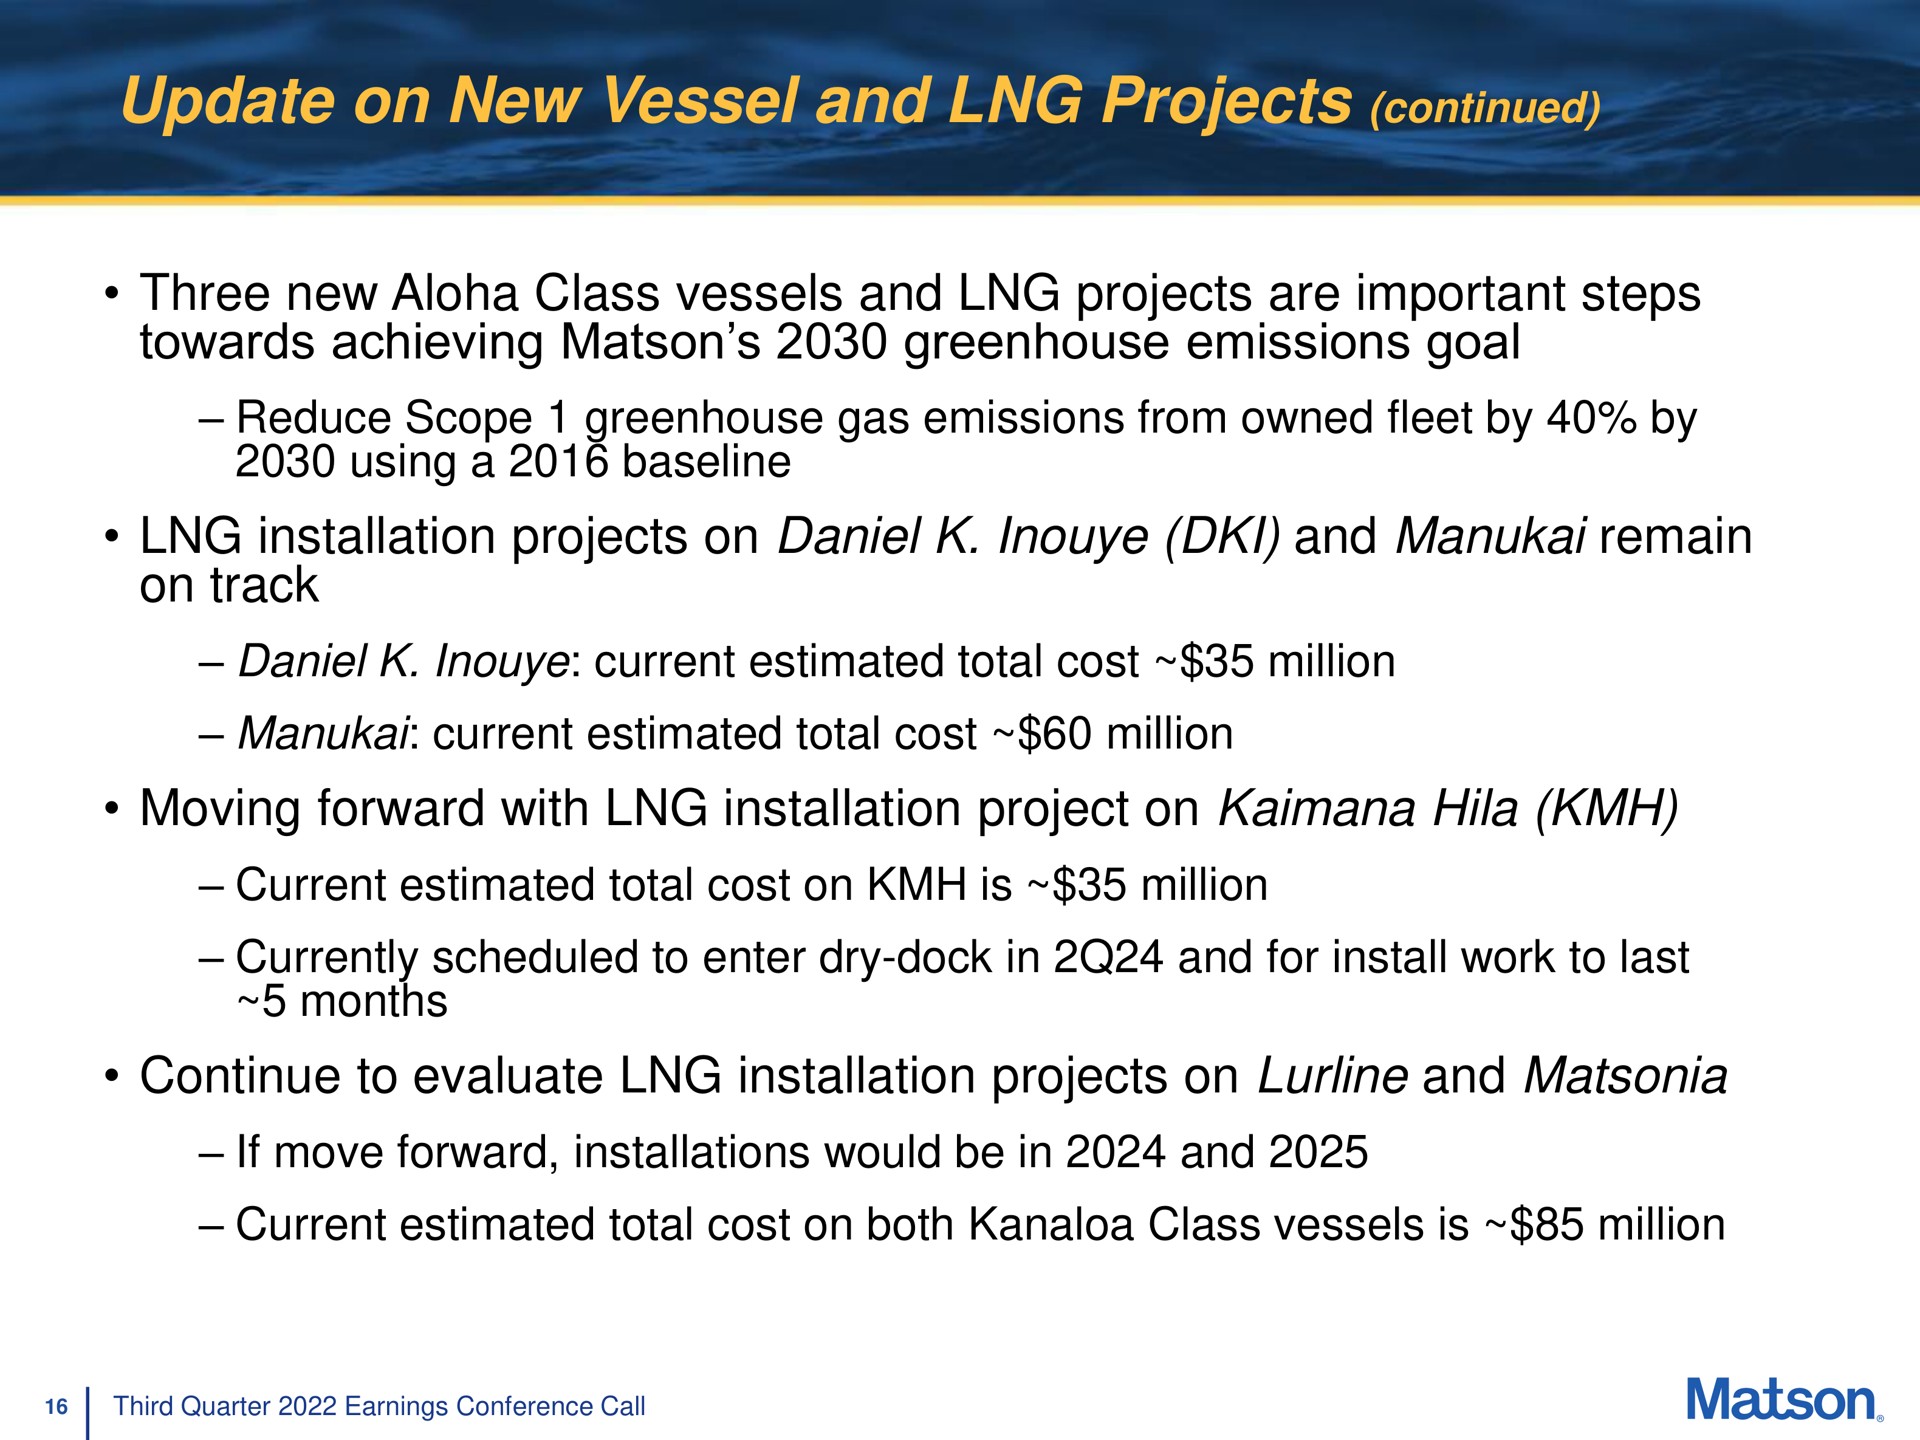 update on new vessel and projects continued three new class vessels and projects are important steps towards achieving greenhouse emissions goal installation projects on and remain on track moving forward with installation project on hila continue to evaluate installation projects on and reduce scope gas from owned fleet by by using a current estimated total cost million current estimated total cost million current estimated total cost is million currently scheduled enter dry dock in for install work last months | Matson